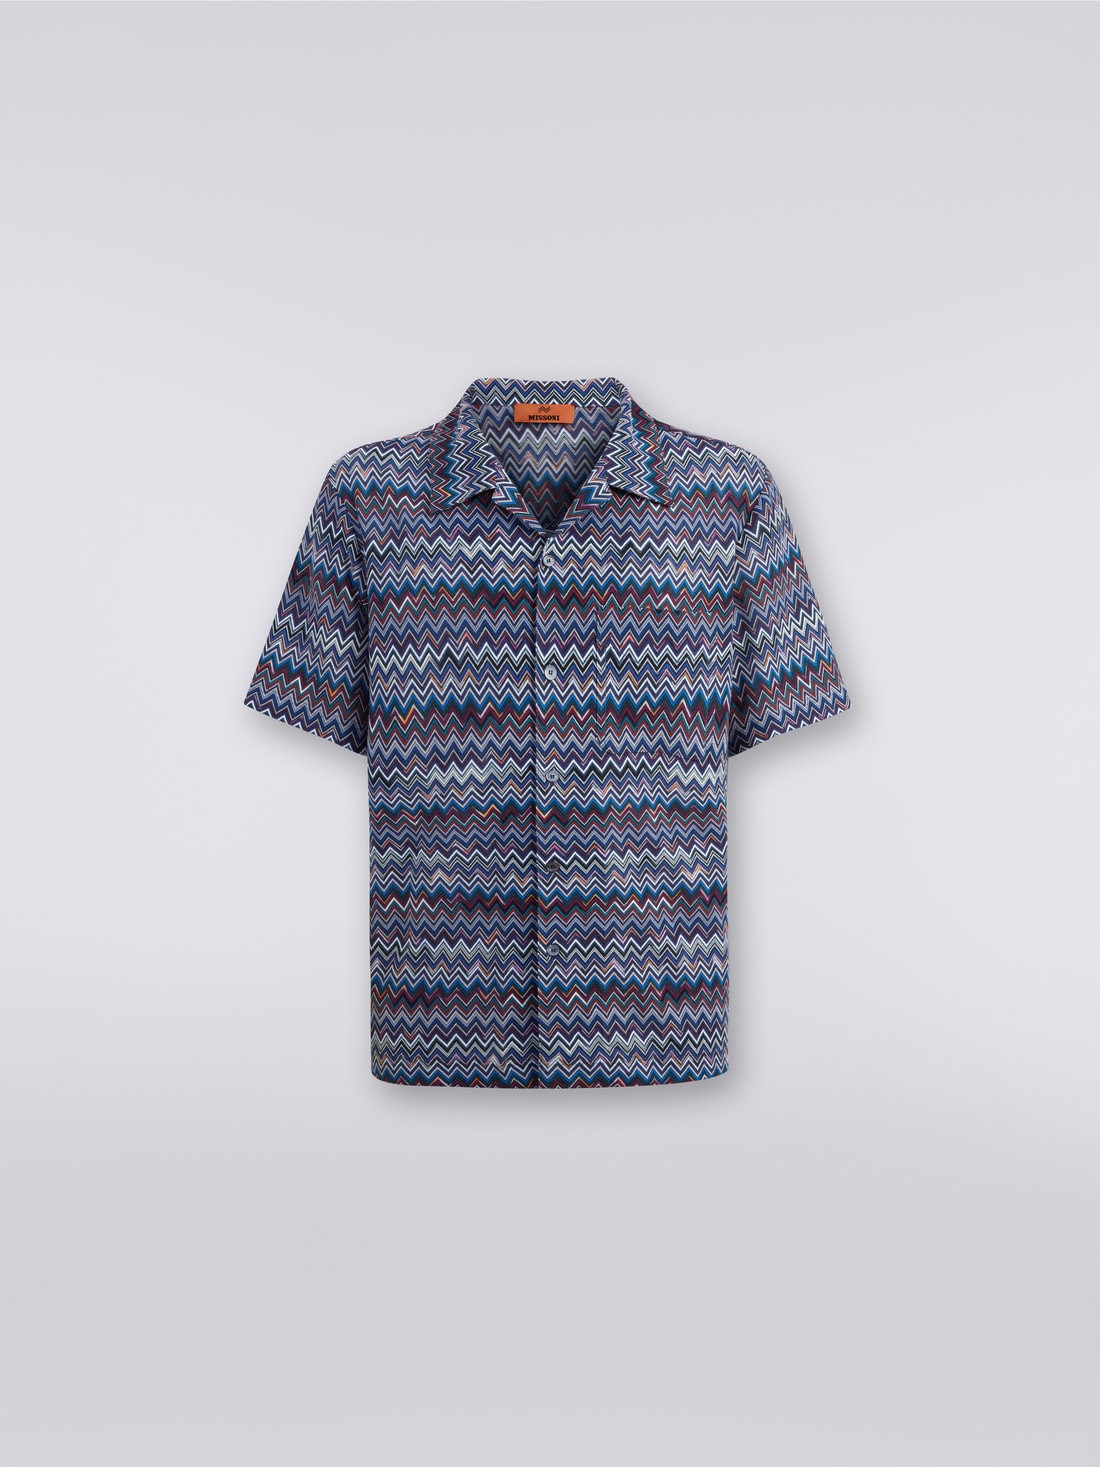 Short-sleeved bowling shirt in zigzag cotton and viscose, Navy Blue  - US23WJ08BR00OUSM8Y1 - 0